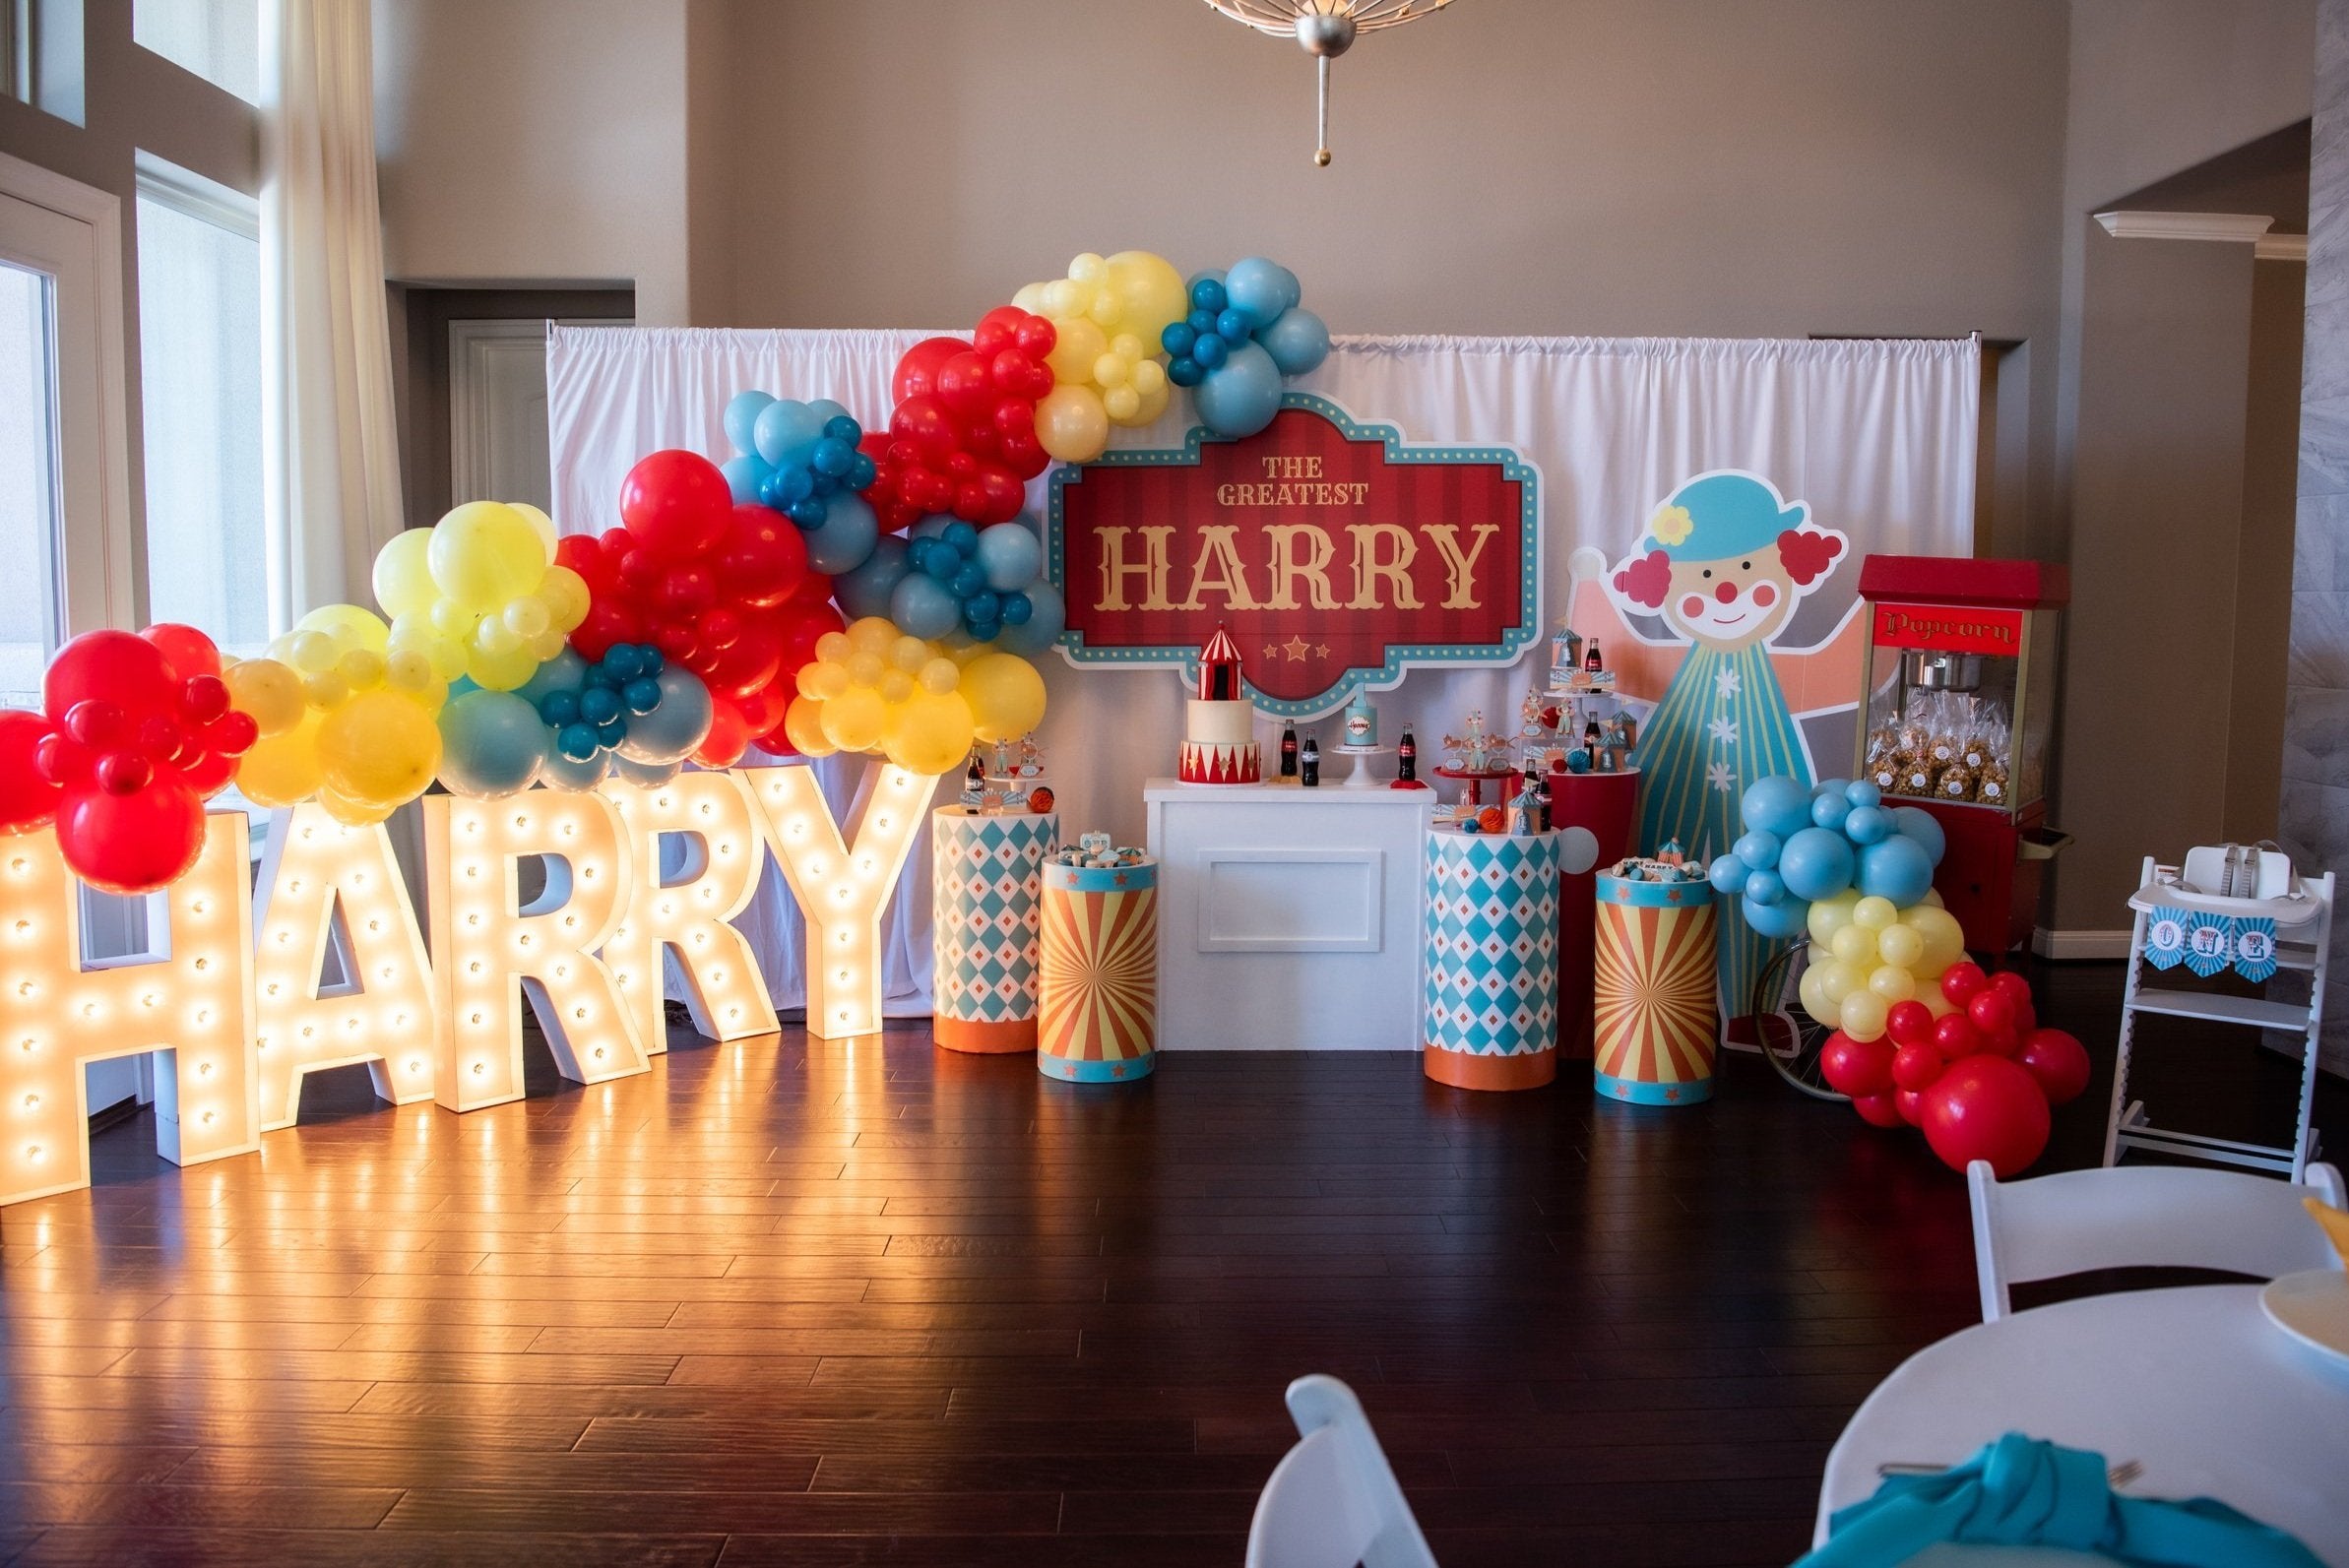 Themed birthday decorations for a fun celebration